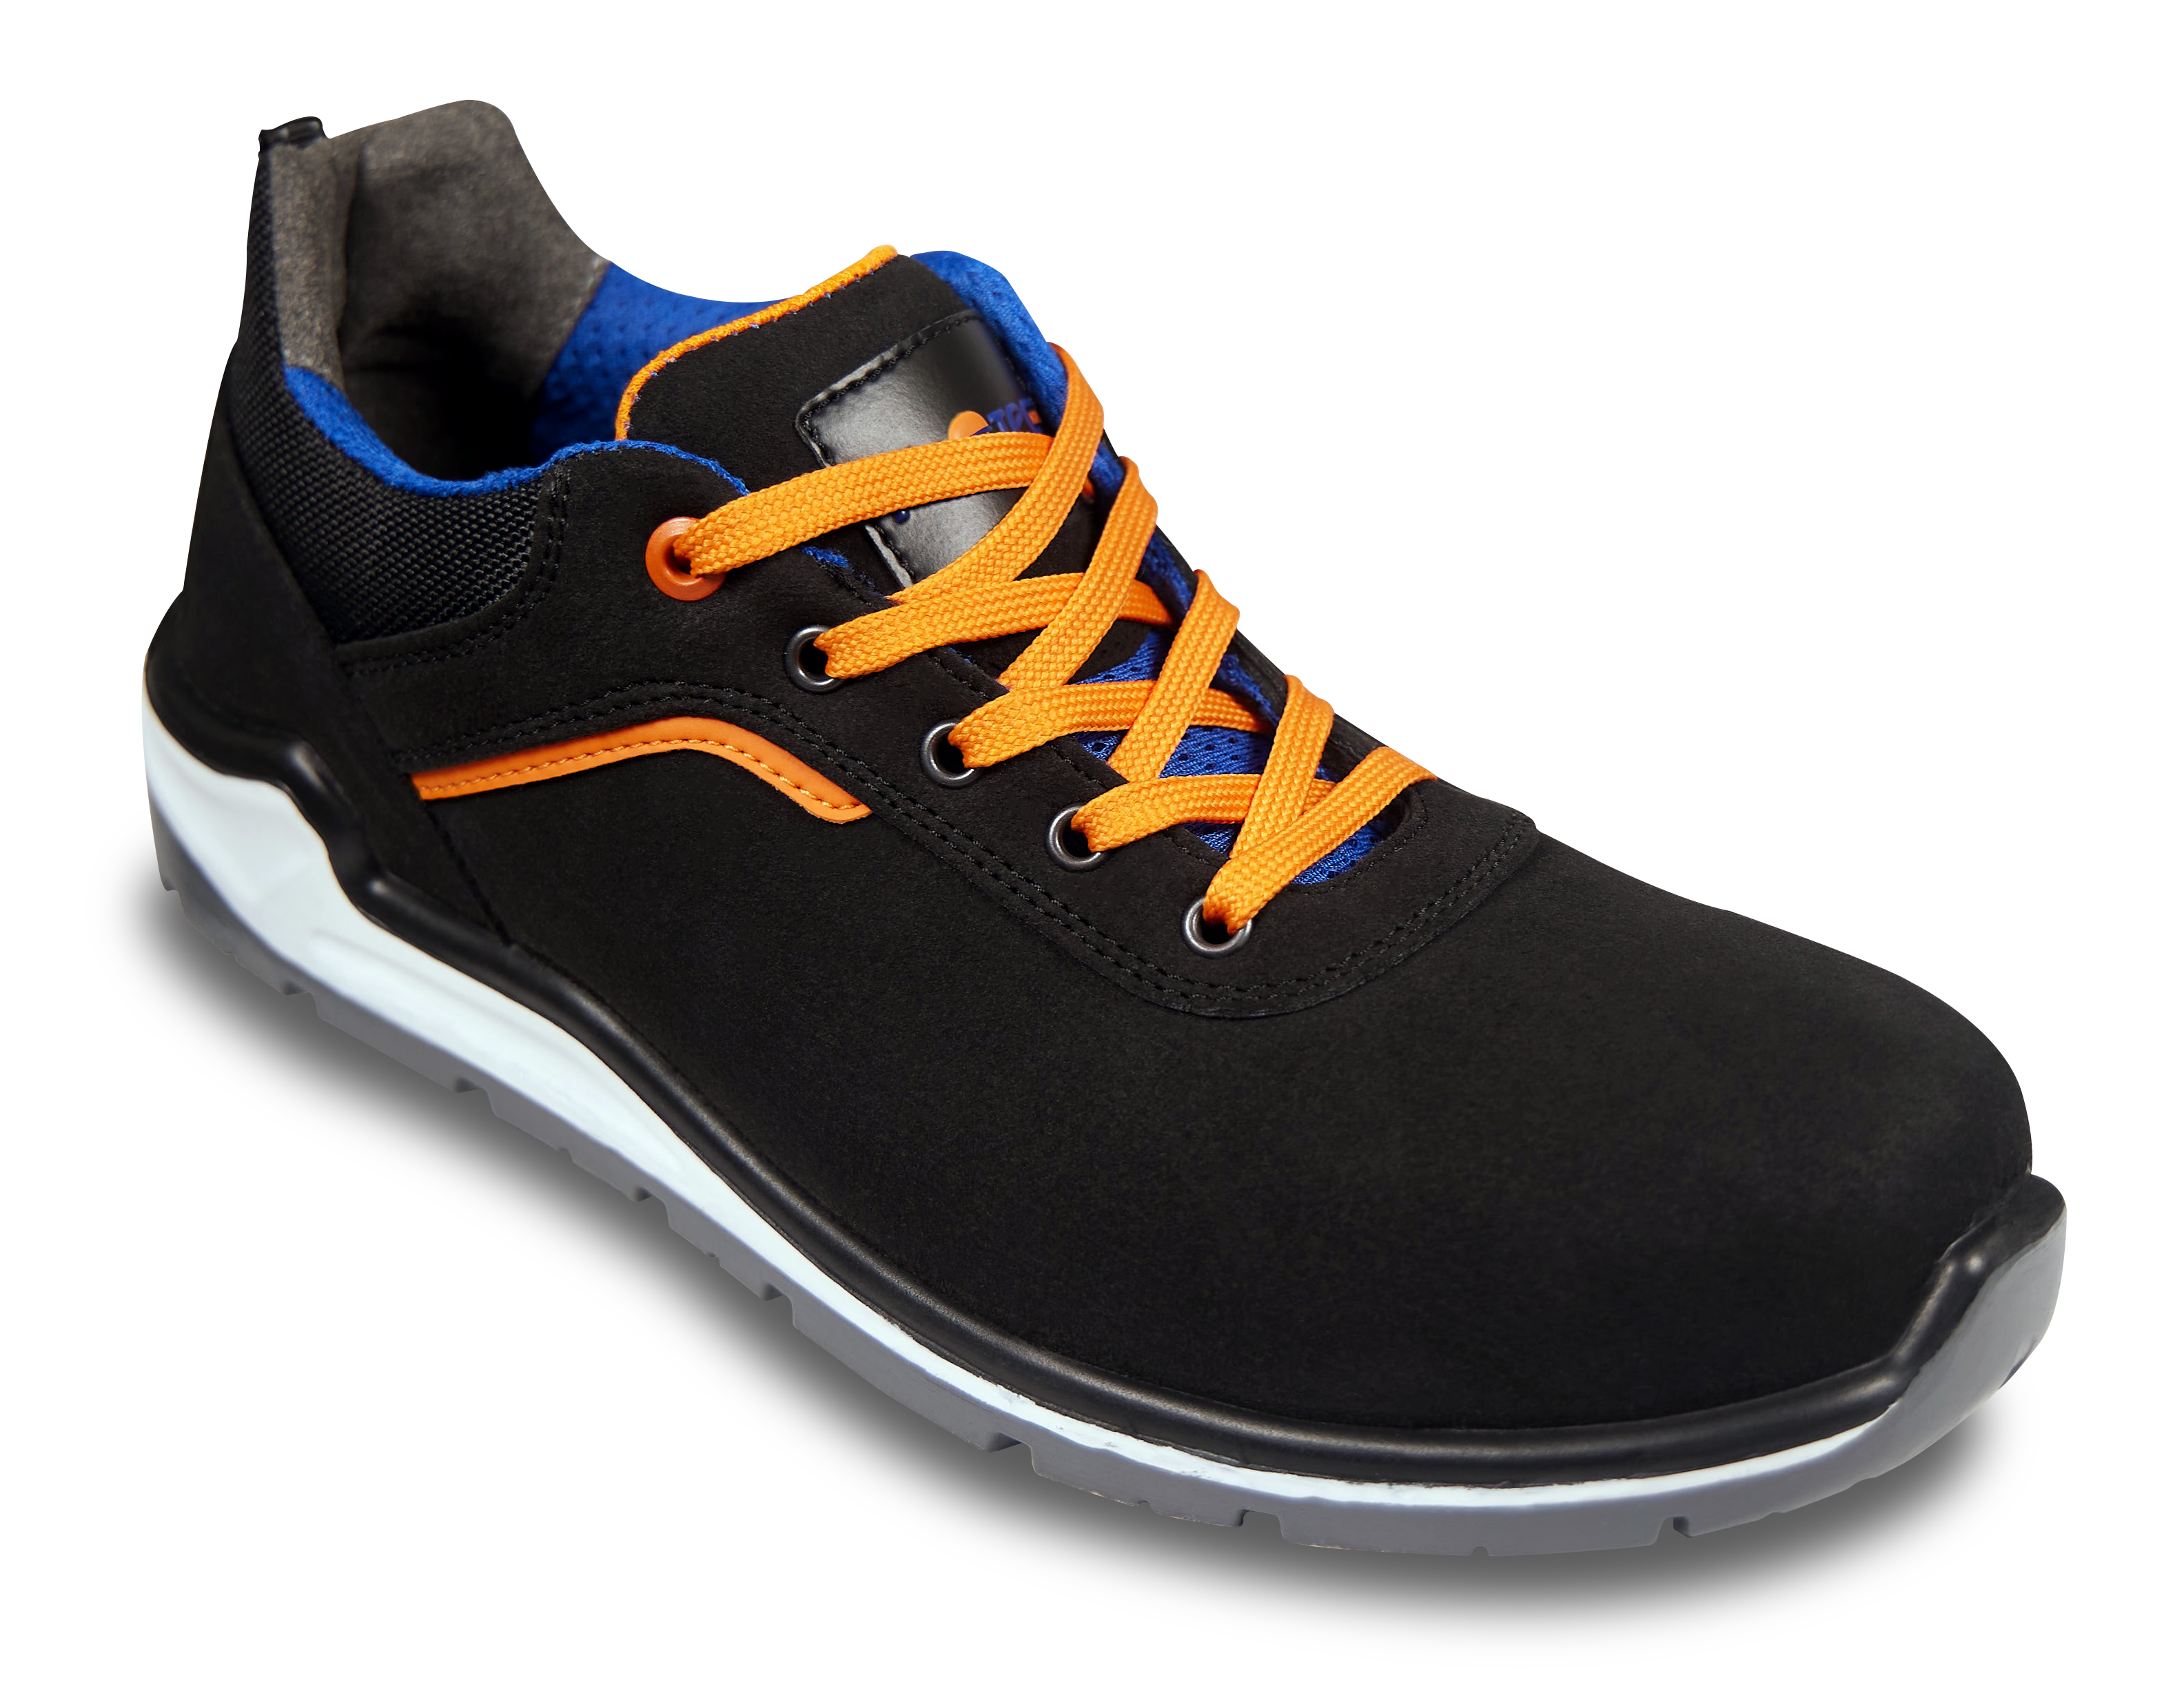 CHAUSSURES DE SECURITE REESE S3 - SHOES FOR CREWS - Protecnord